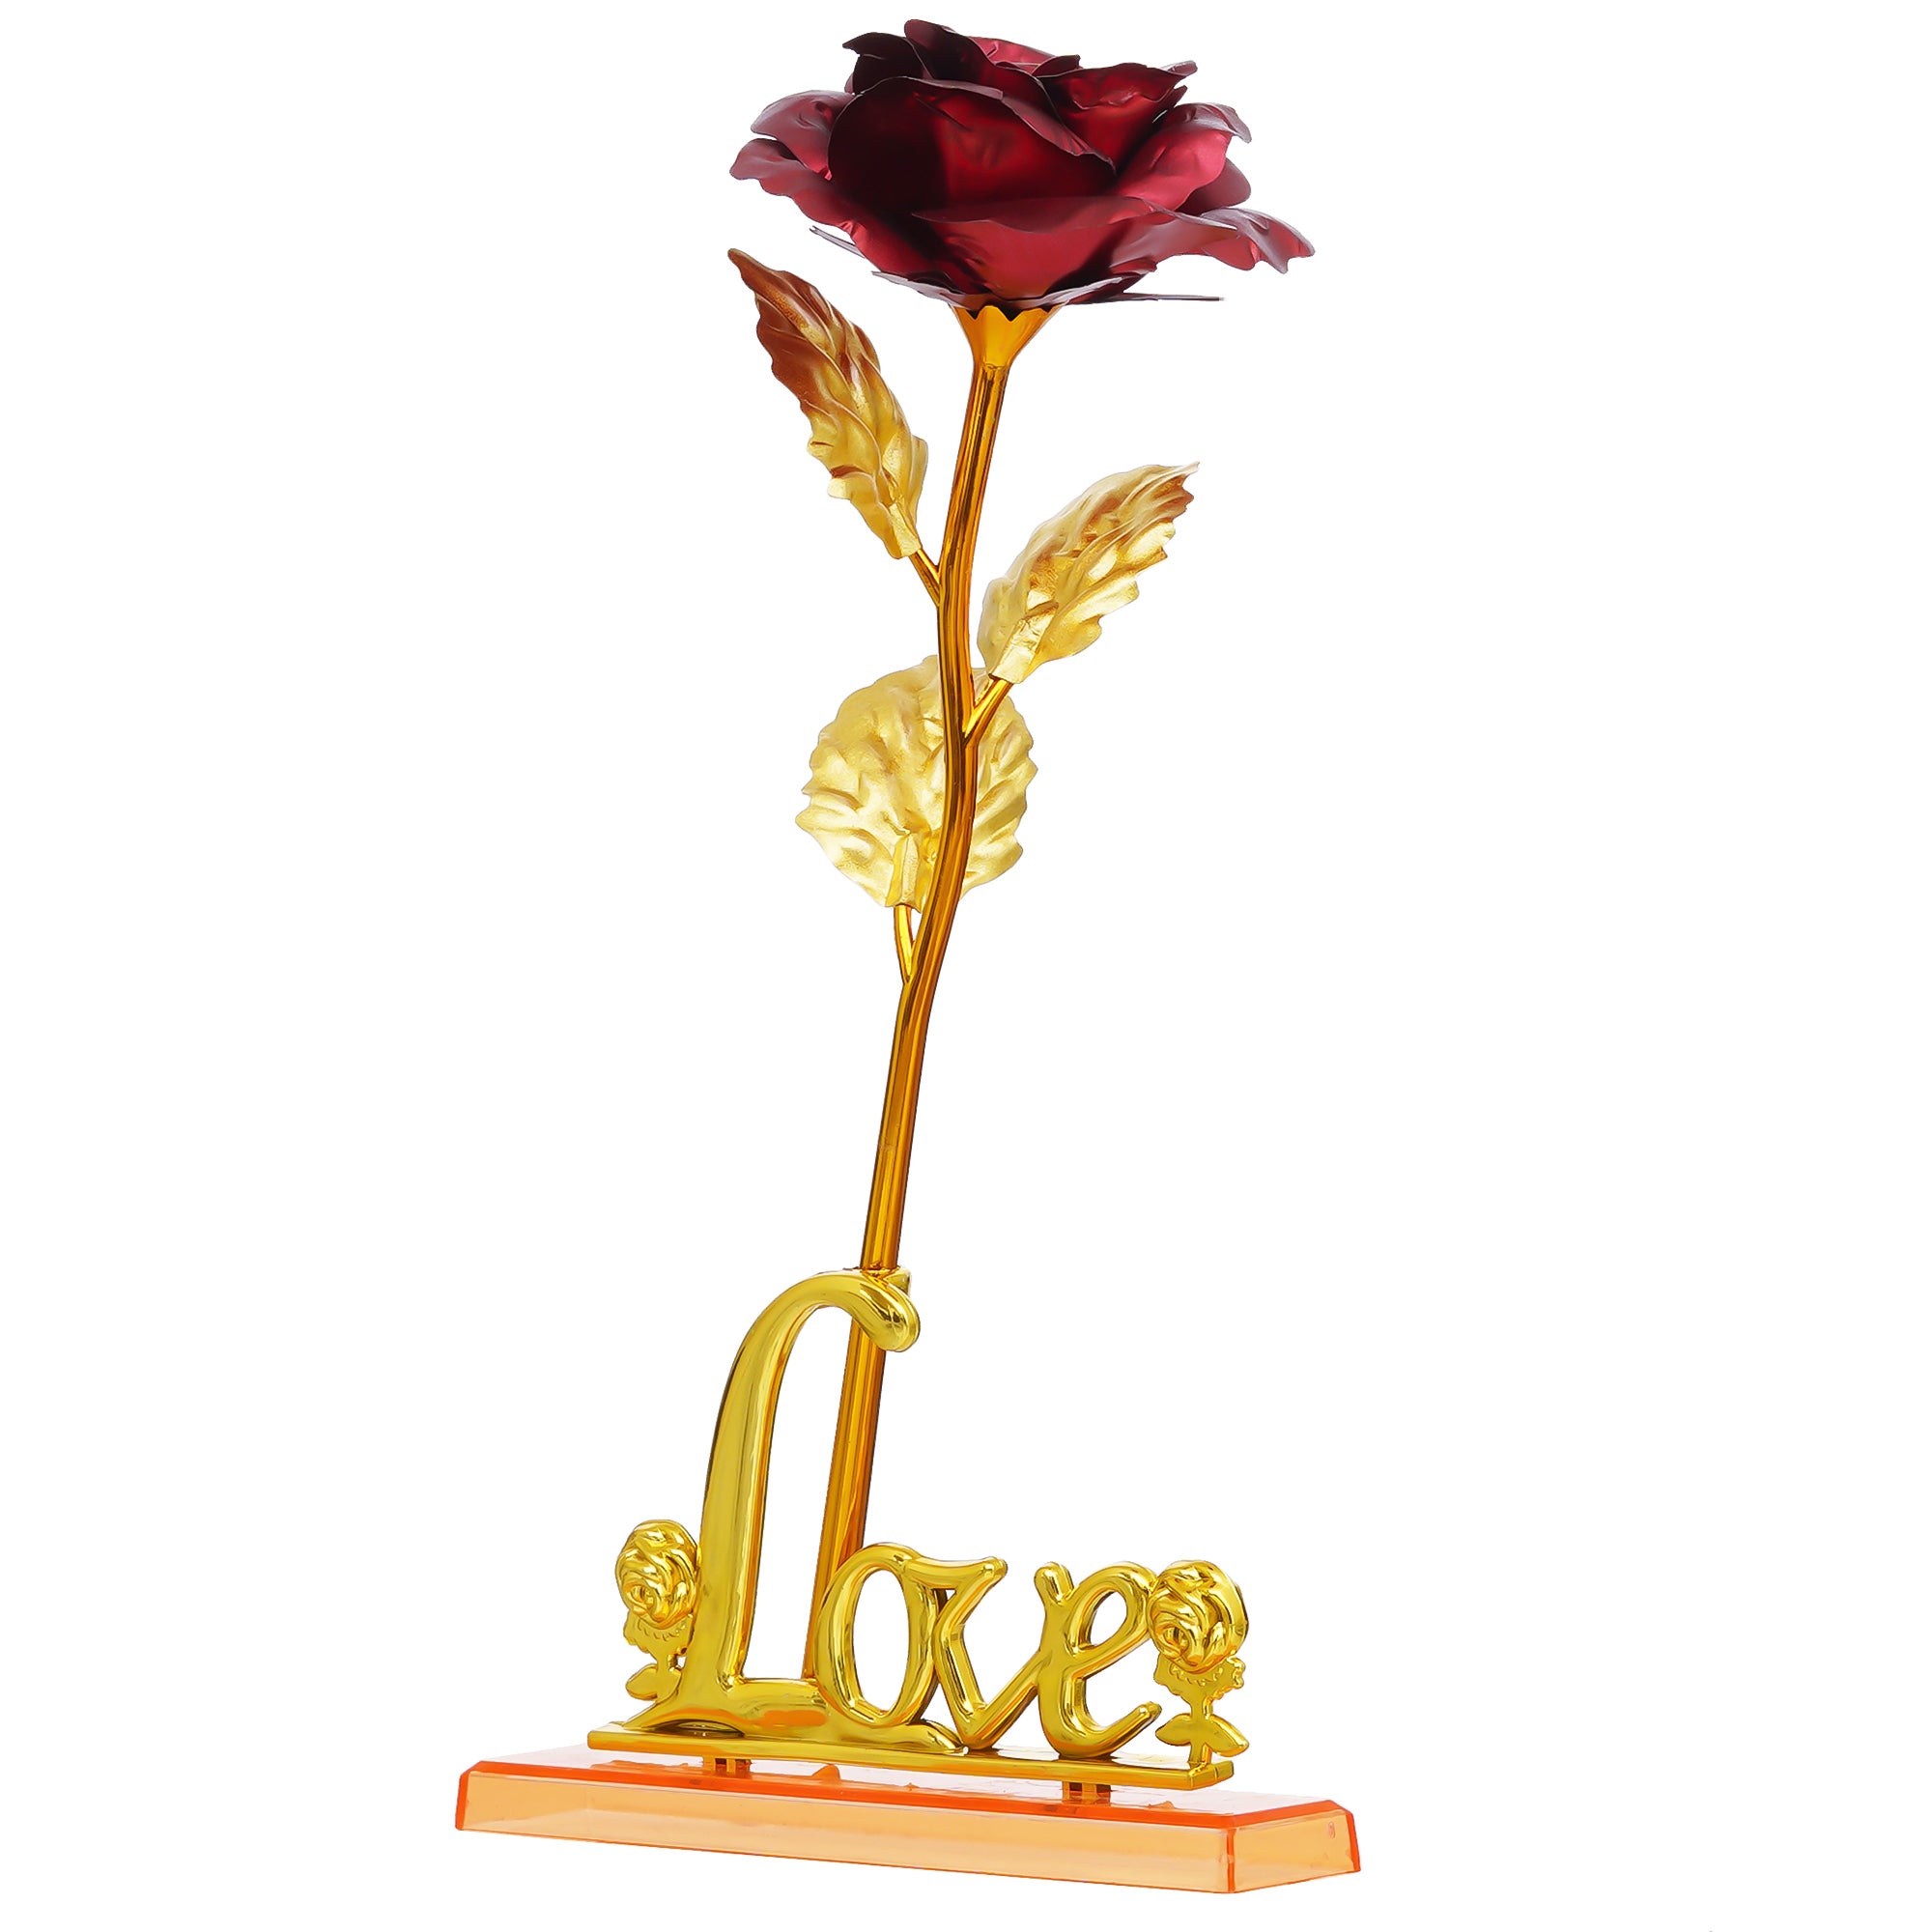 Valentine Combo of Love Golden Red Rose Table Decor Gift Set Showpiece, Colorful Girl and Boy "Sweet I Love You" Kissing Figurine 7